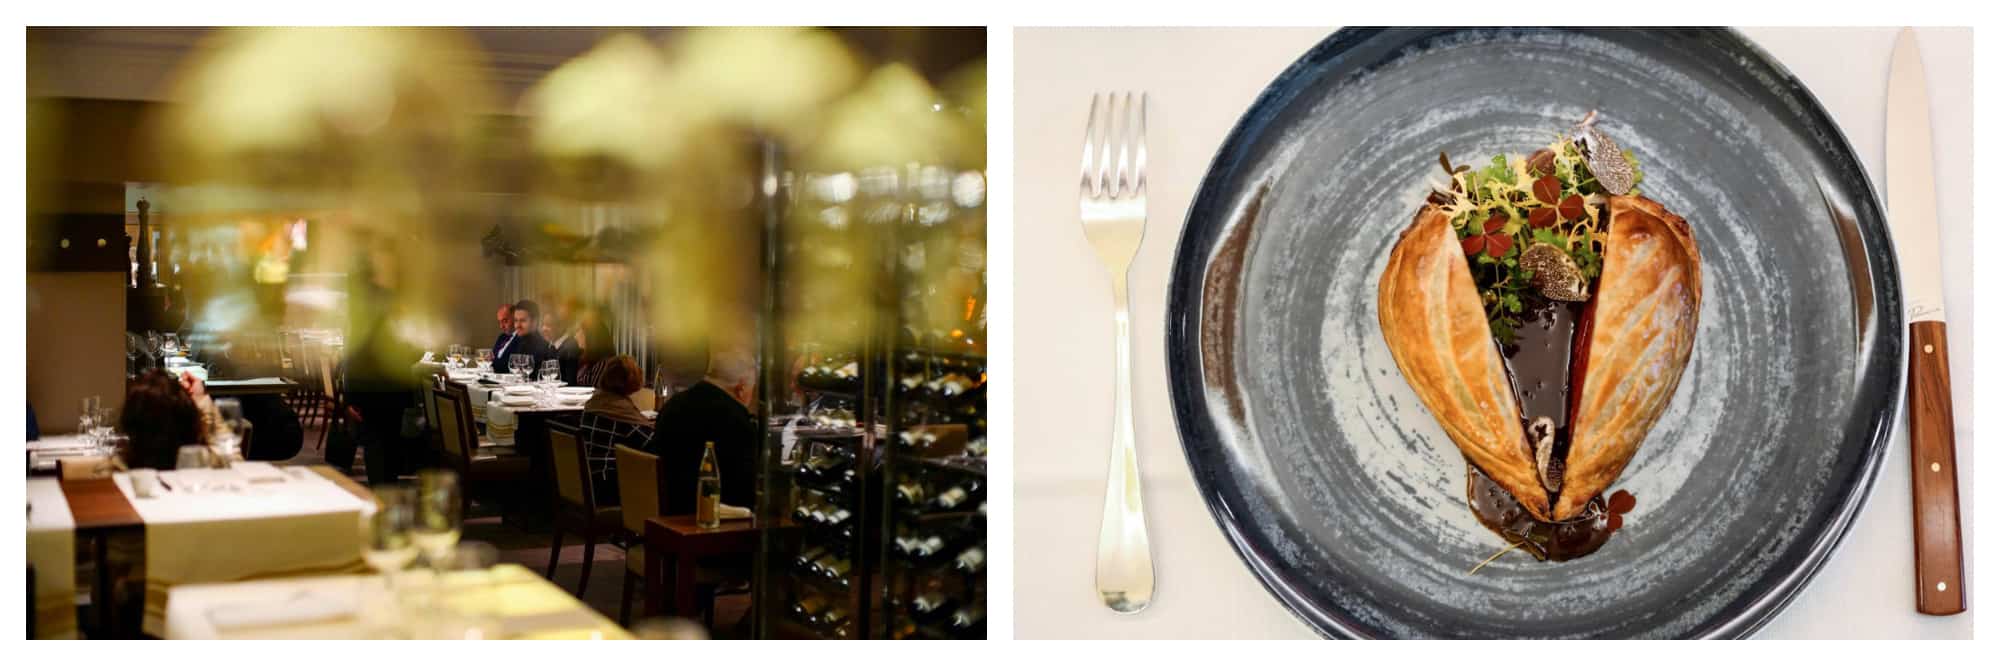 The exterior of the restaurant Le Violon d'Ingres in Paris with people sitting at tables and wine fridges (left). A bird's eye view of a grey plate with cutlery on either side, with a wellington, salad and sauce in the middle (right).